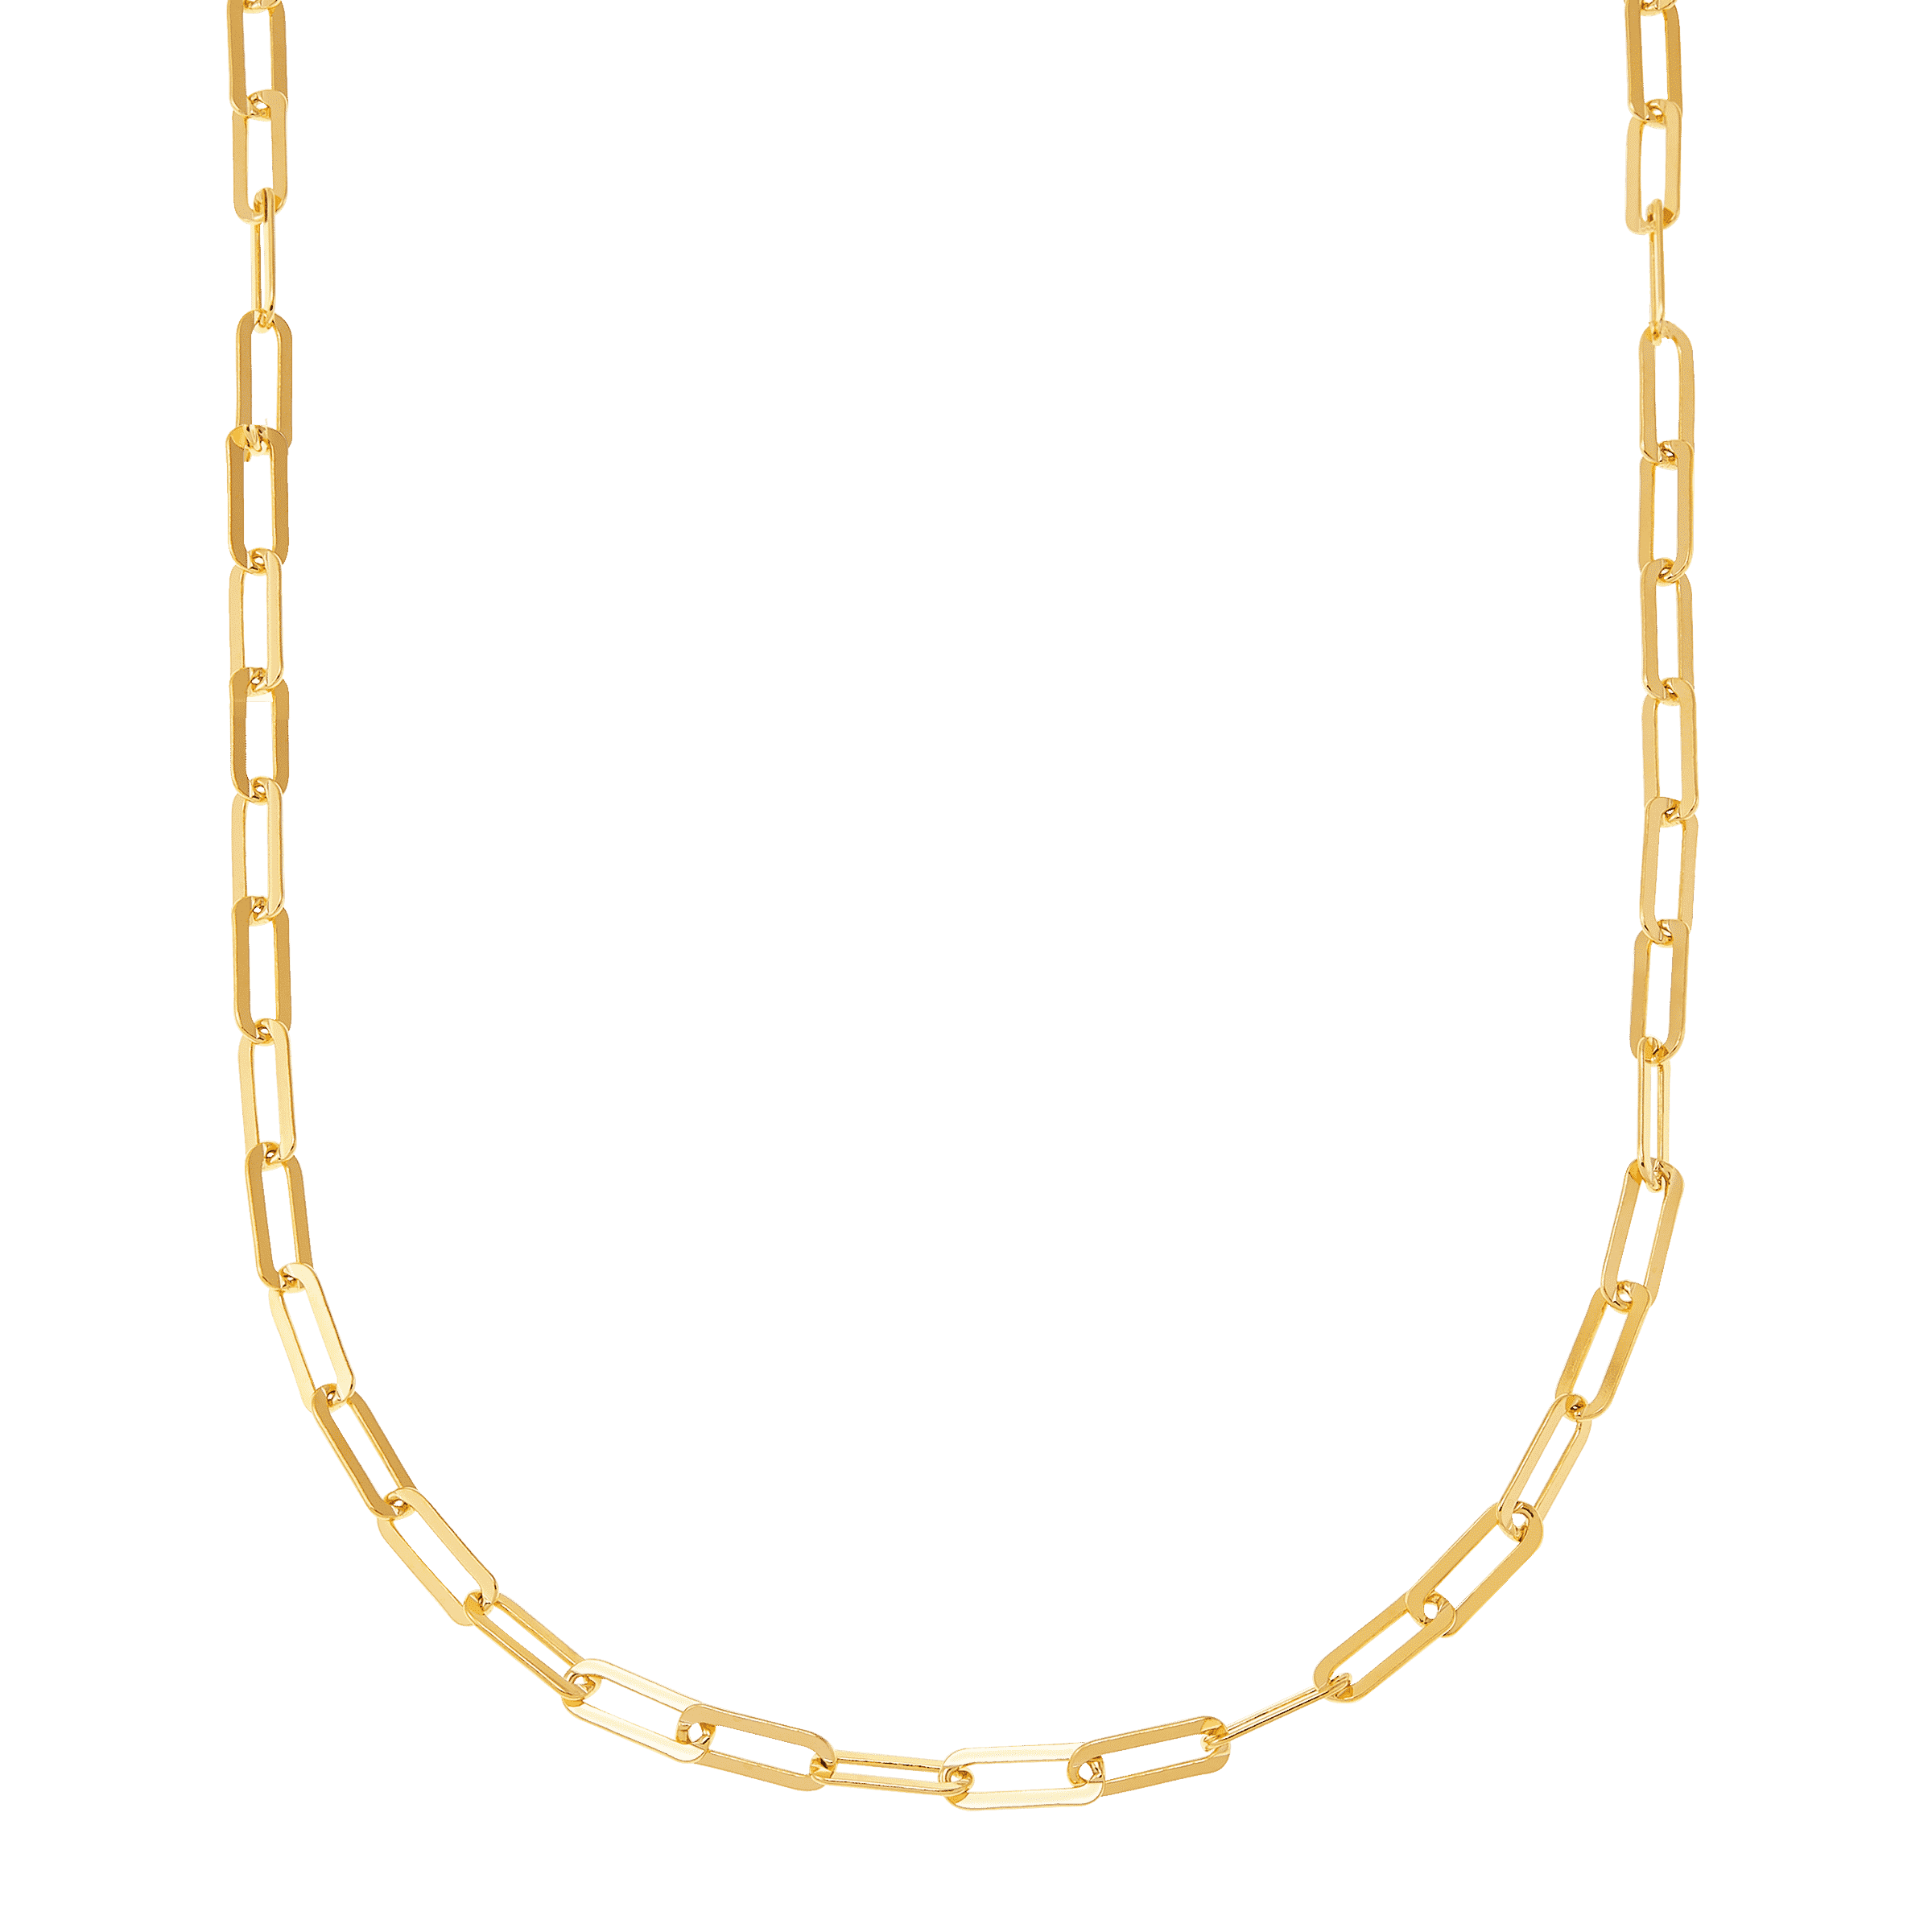 14K Gold Filled Small Paper Clip & Beaded Necklace Layering Set 16 Inches